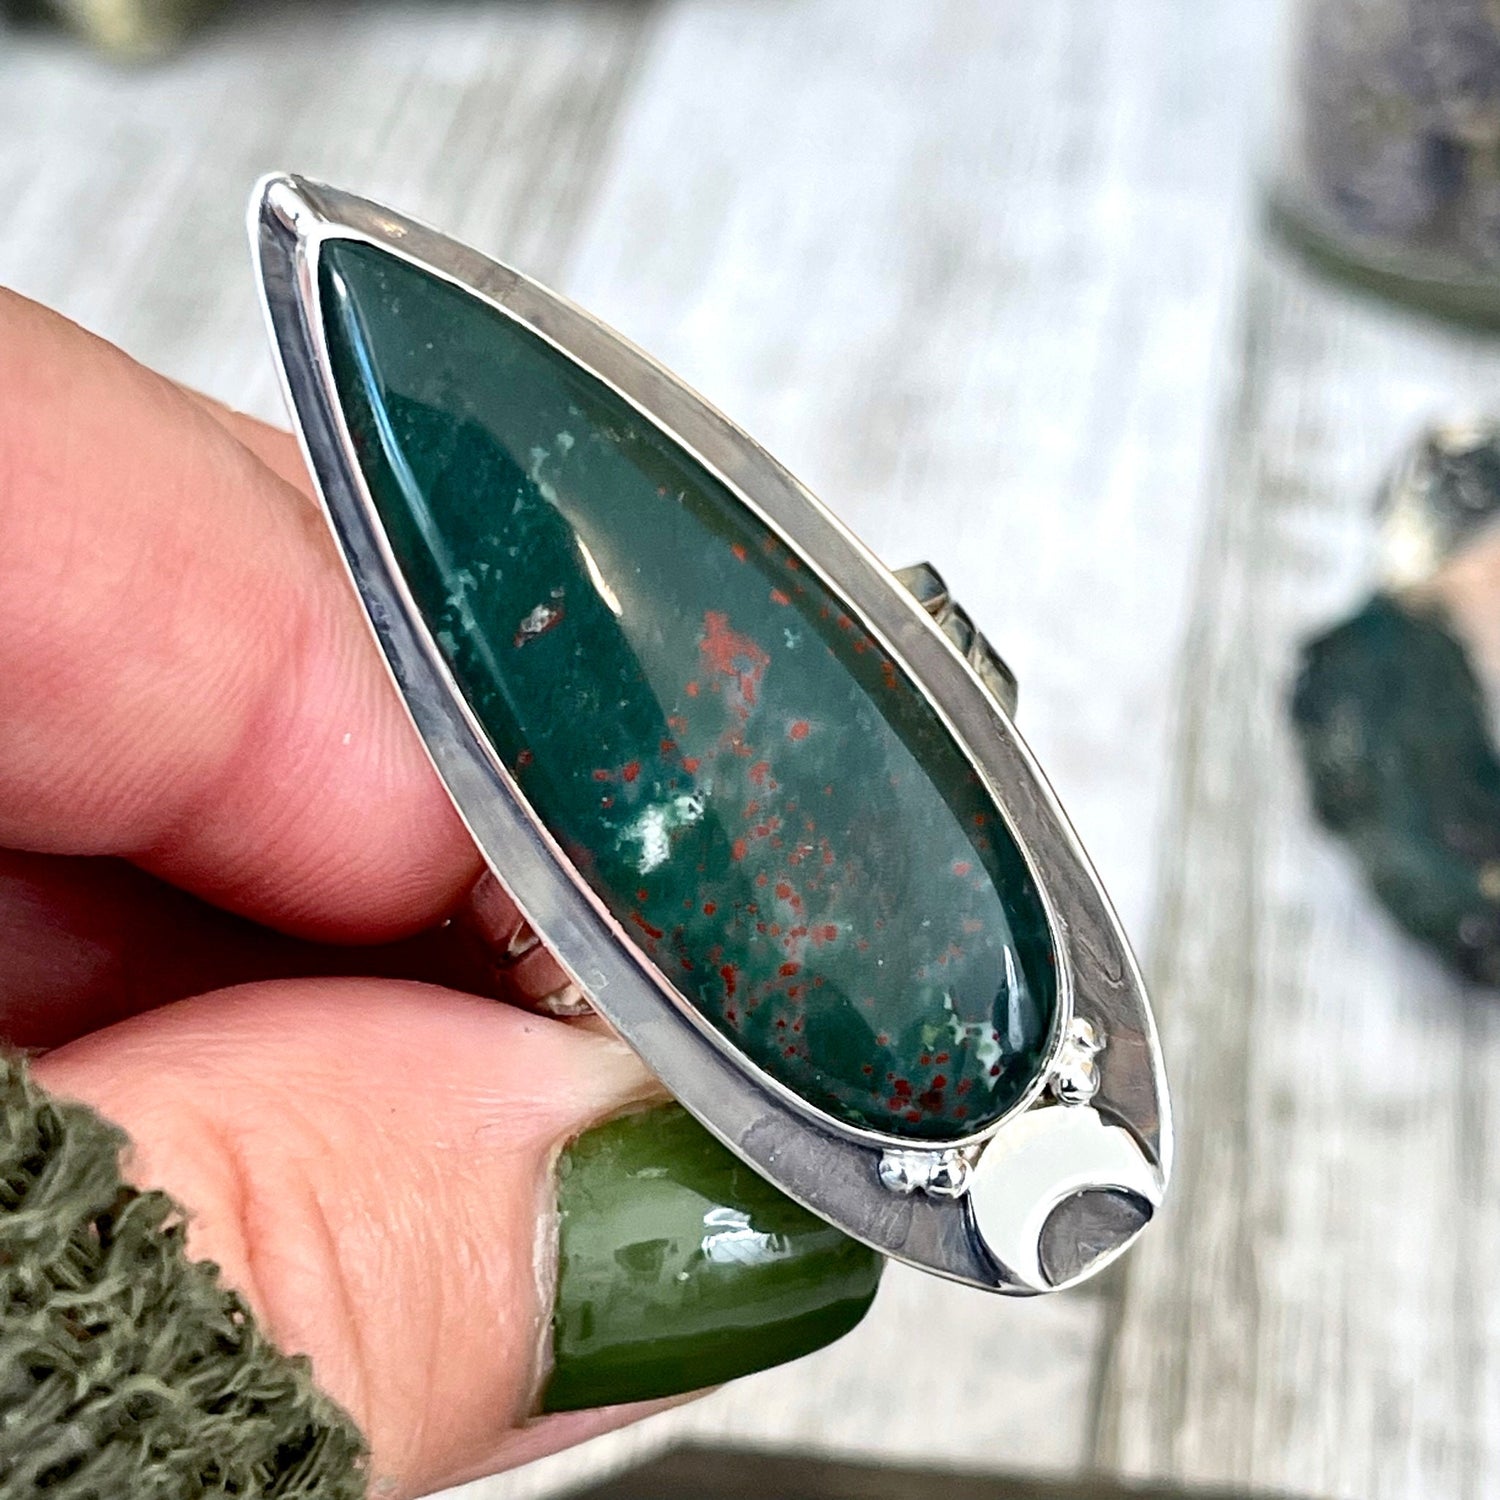 Magic Moons Bloodstone Statement Ring in Sterling Silver- Designed by FOXLARK Collection Size 5 6 7 8 9 10 11 / Gothic Jewelry